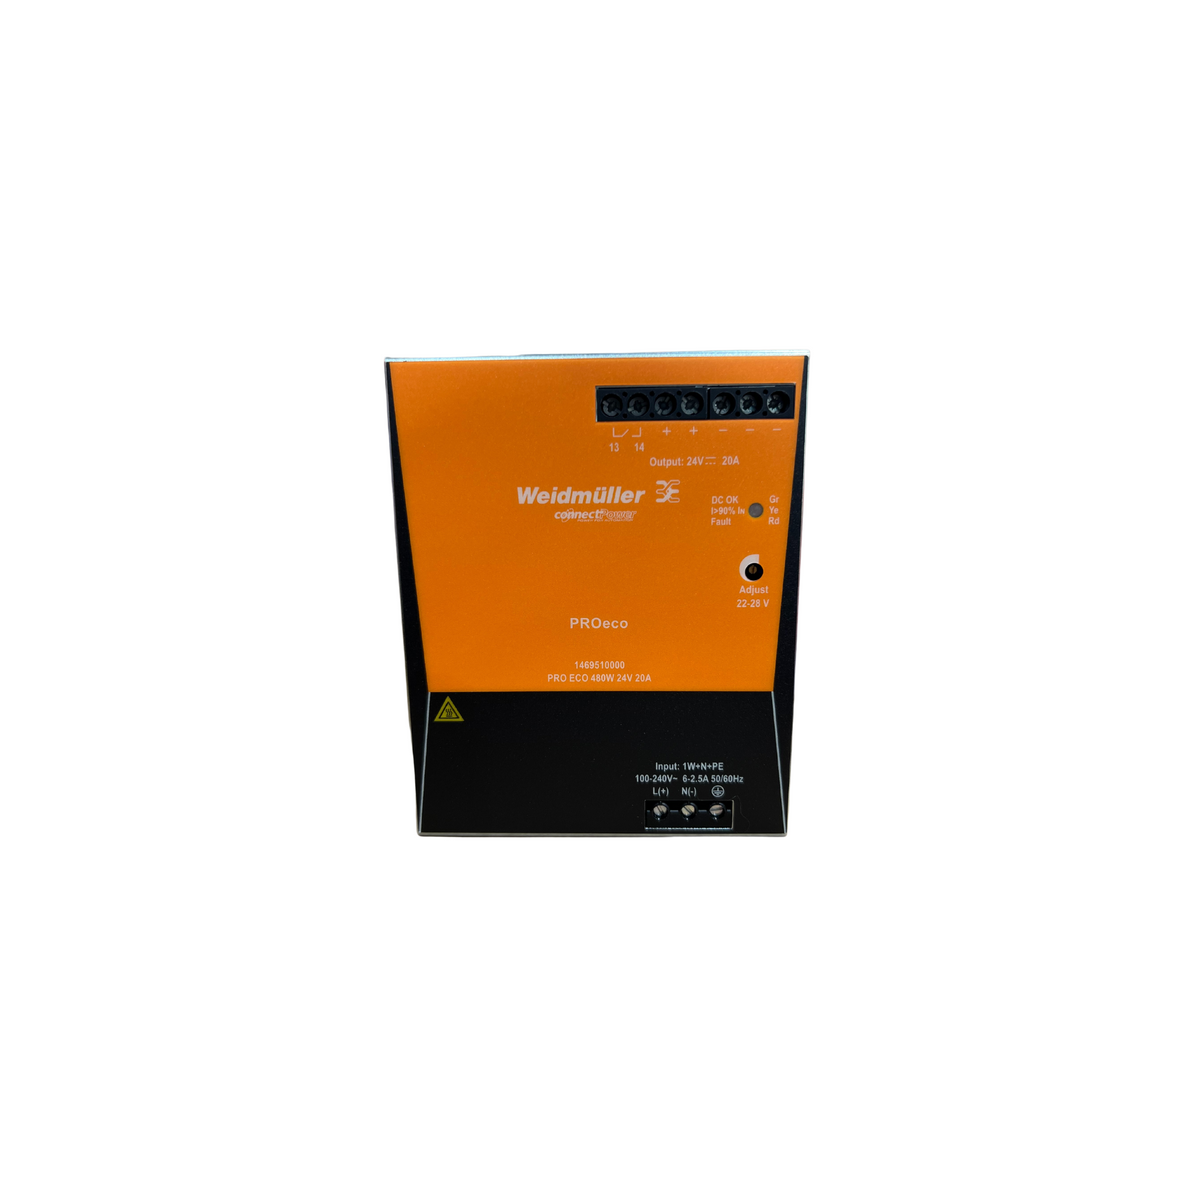 rectangular power supply unit with an orange label in the front